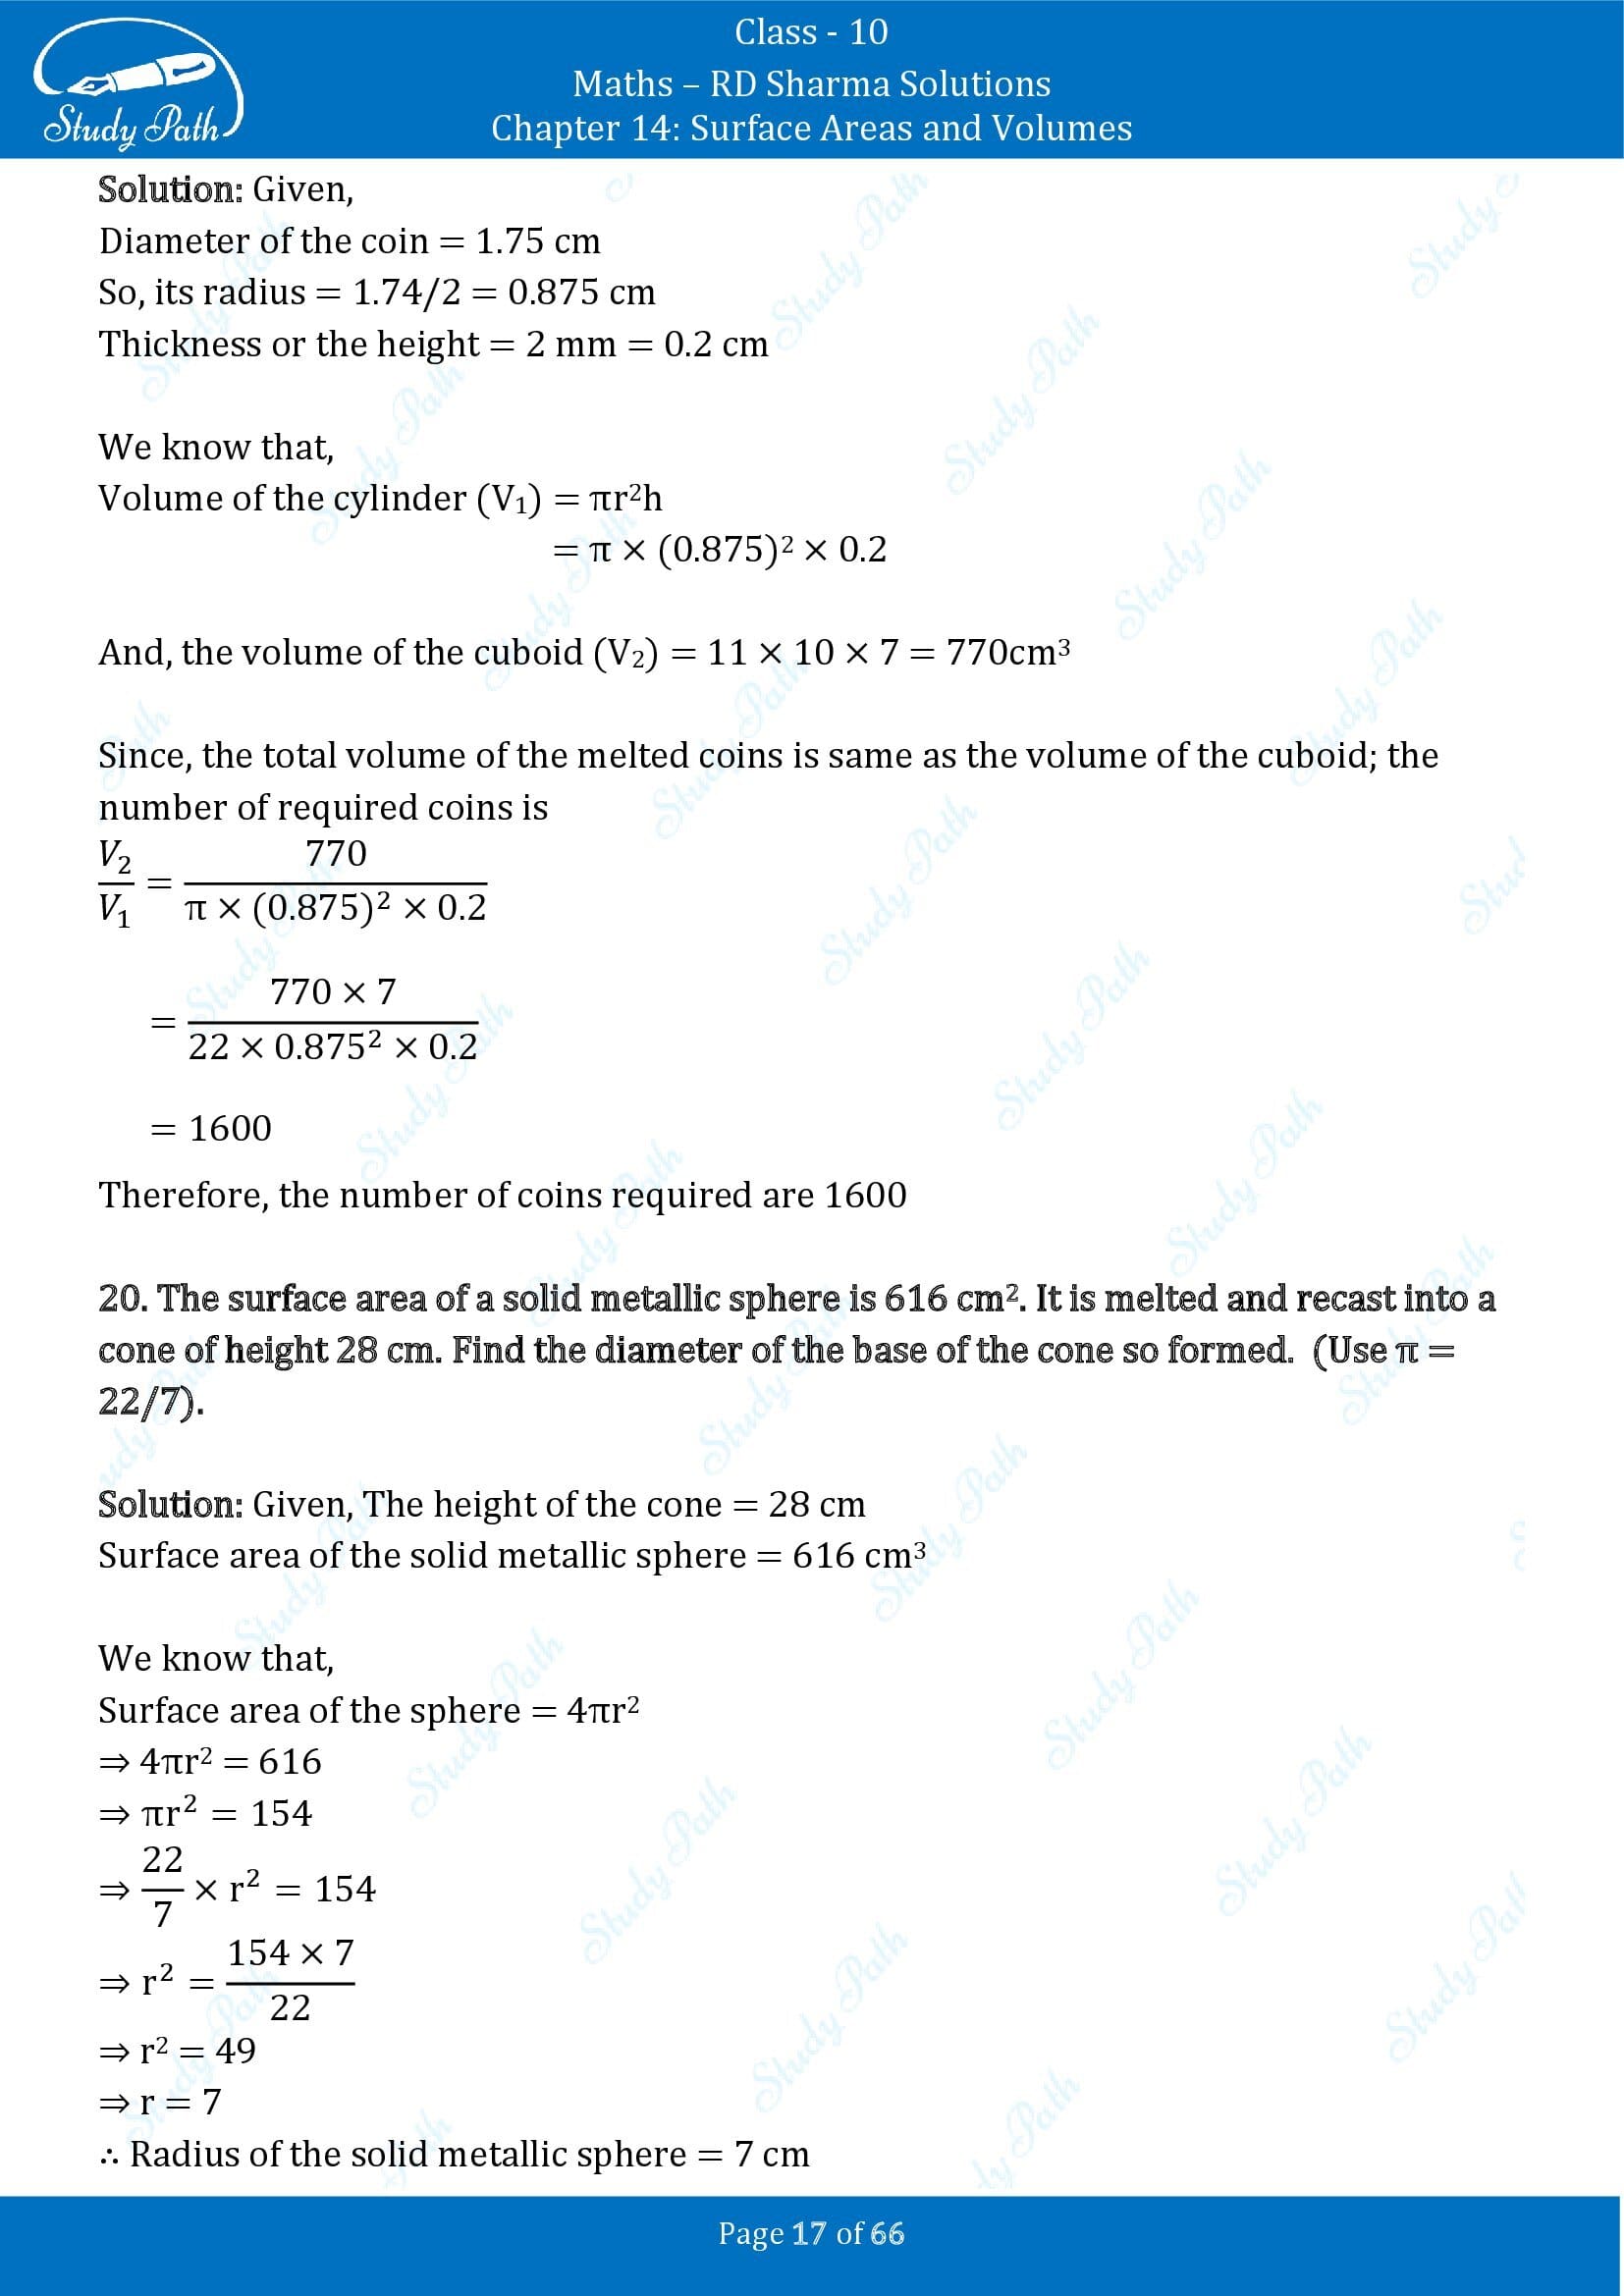 RD Sharma Solutions Class 10 Chapter 14 Surface Areas and Volumes Exercise 14.1 00017